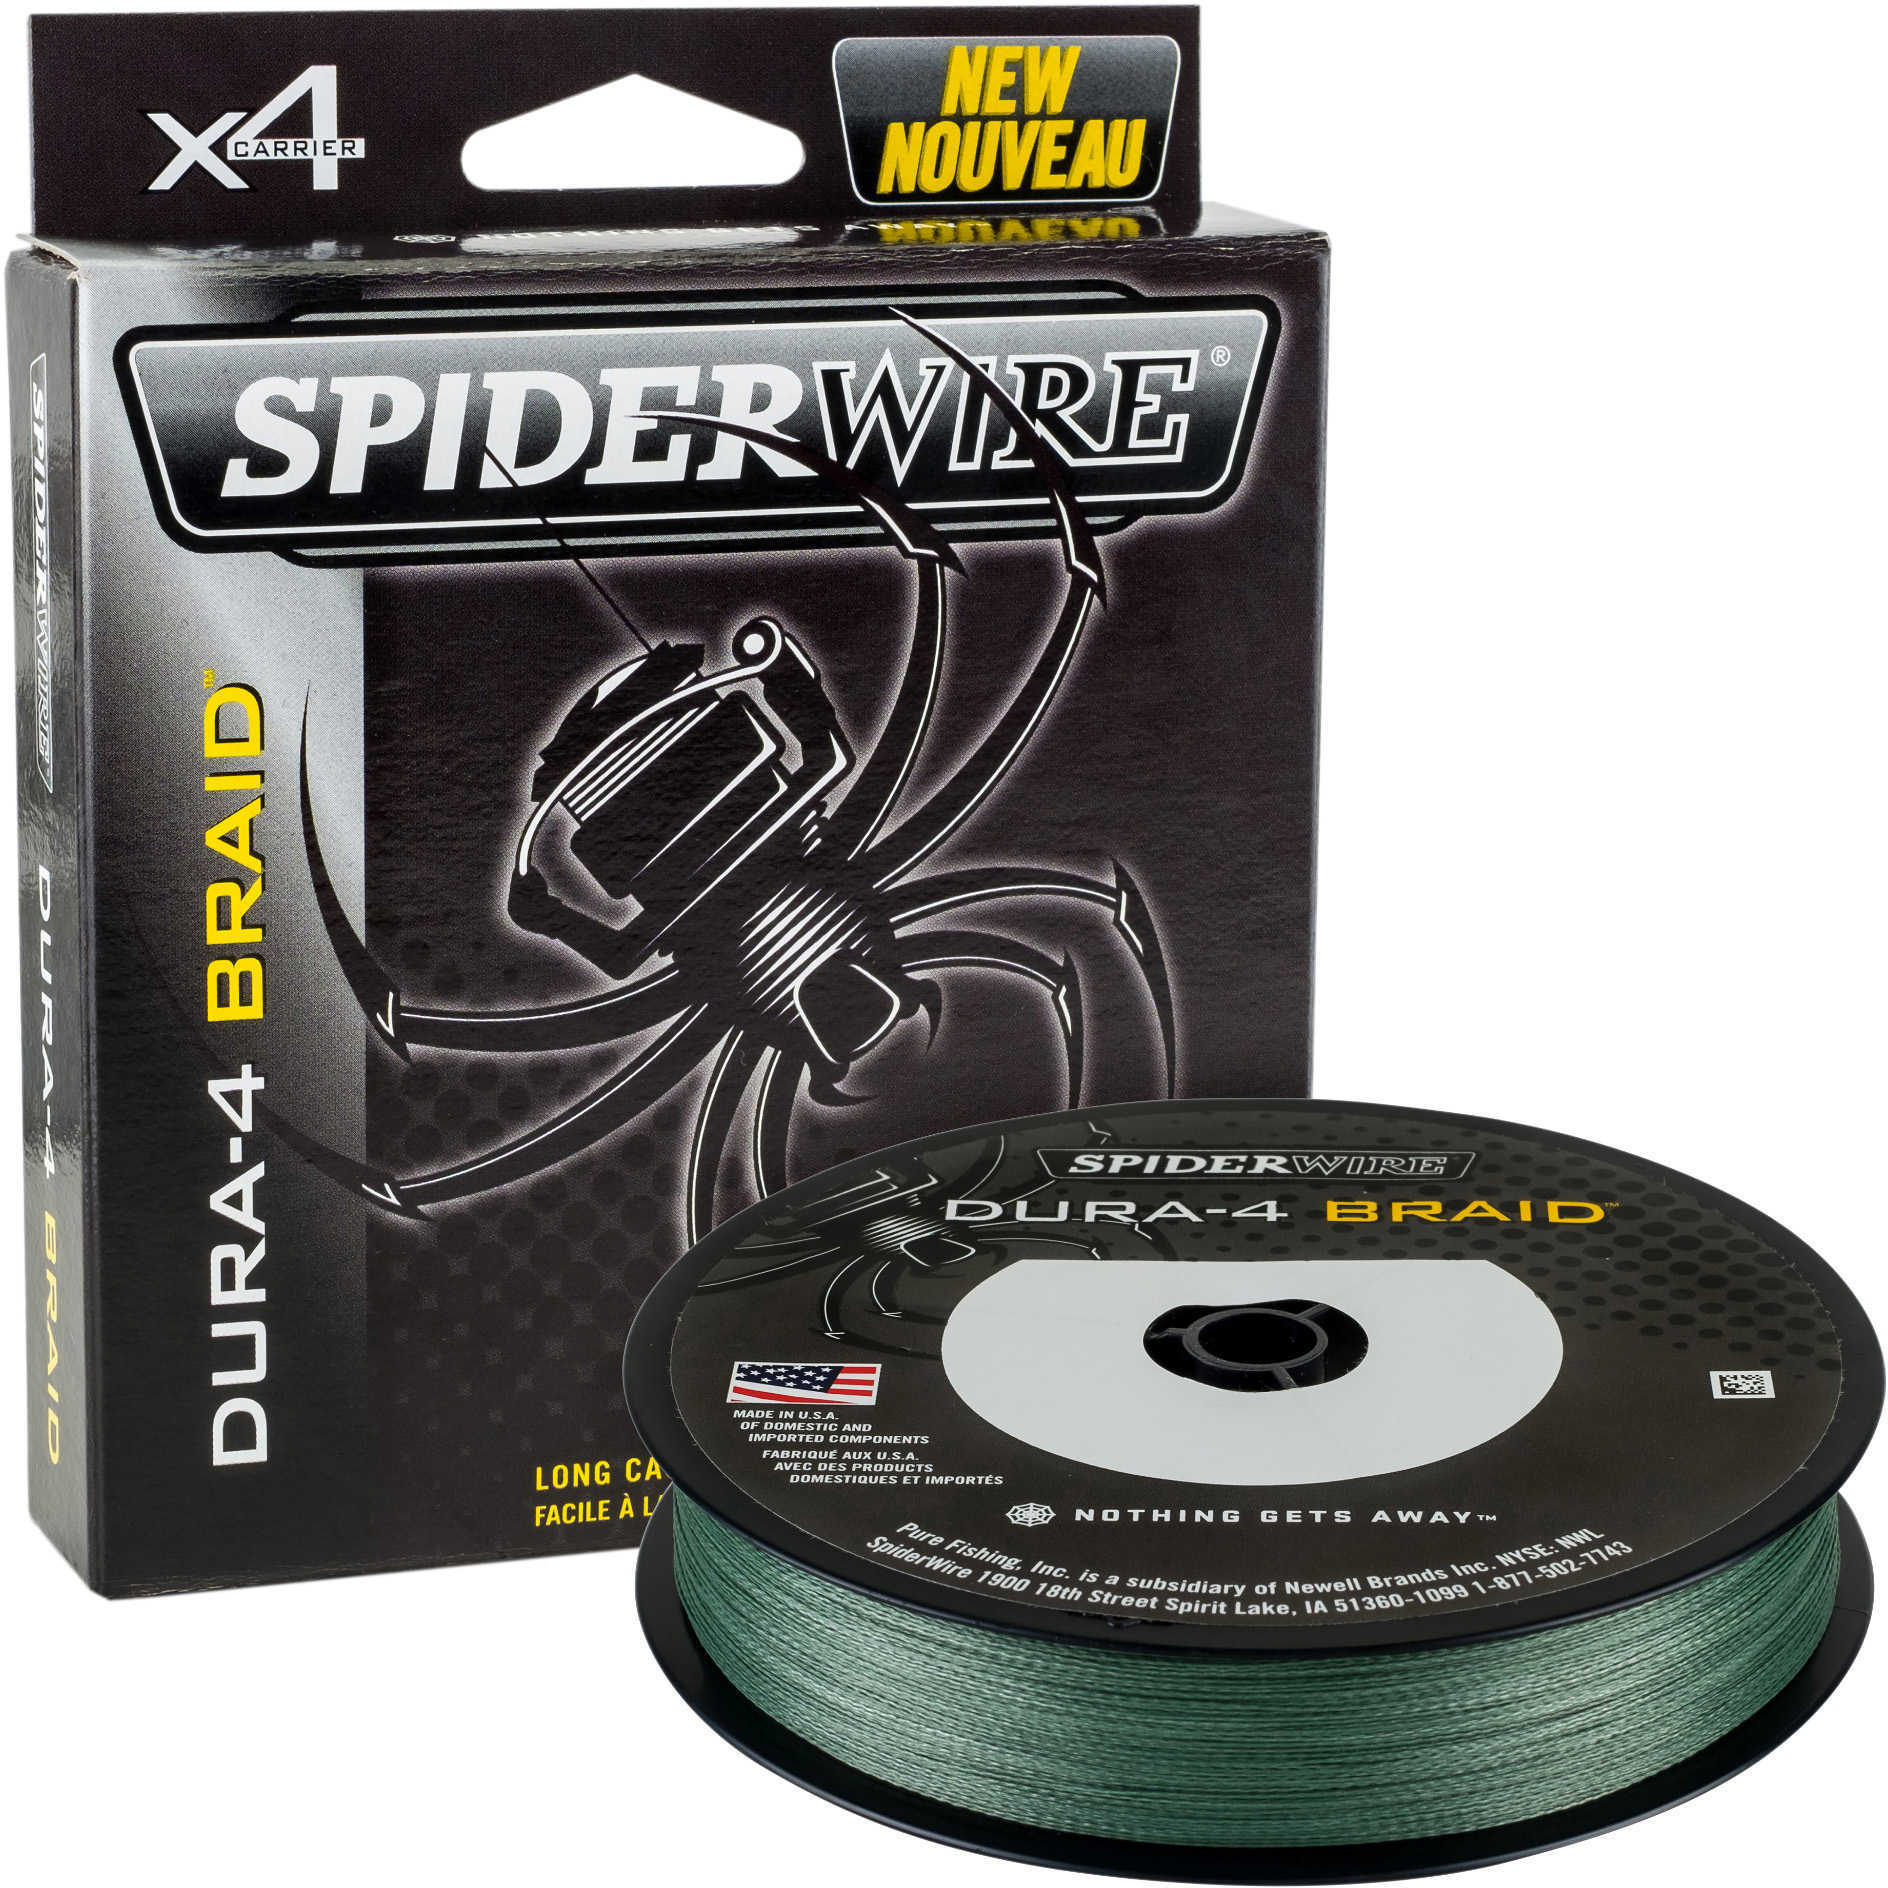 Spiderwire Dura-4 Braided Line 300 Yards , 50 lbs Tested, 0.014" Diameter, Moss Green